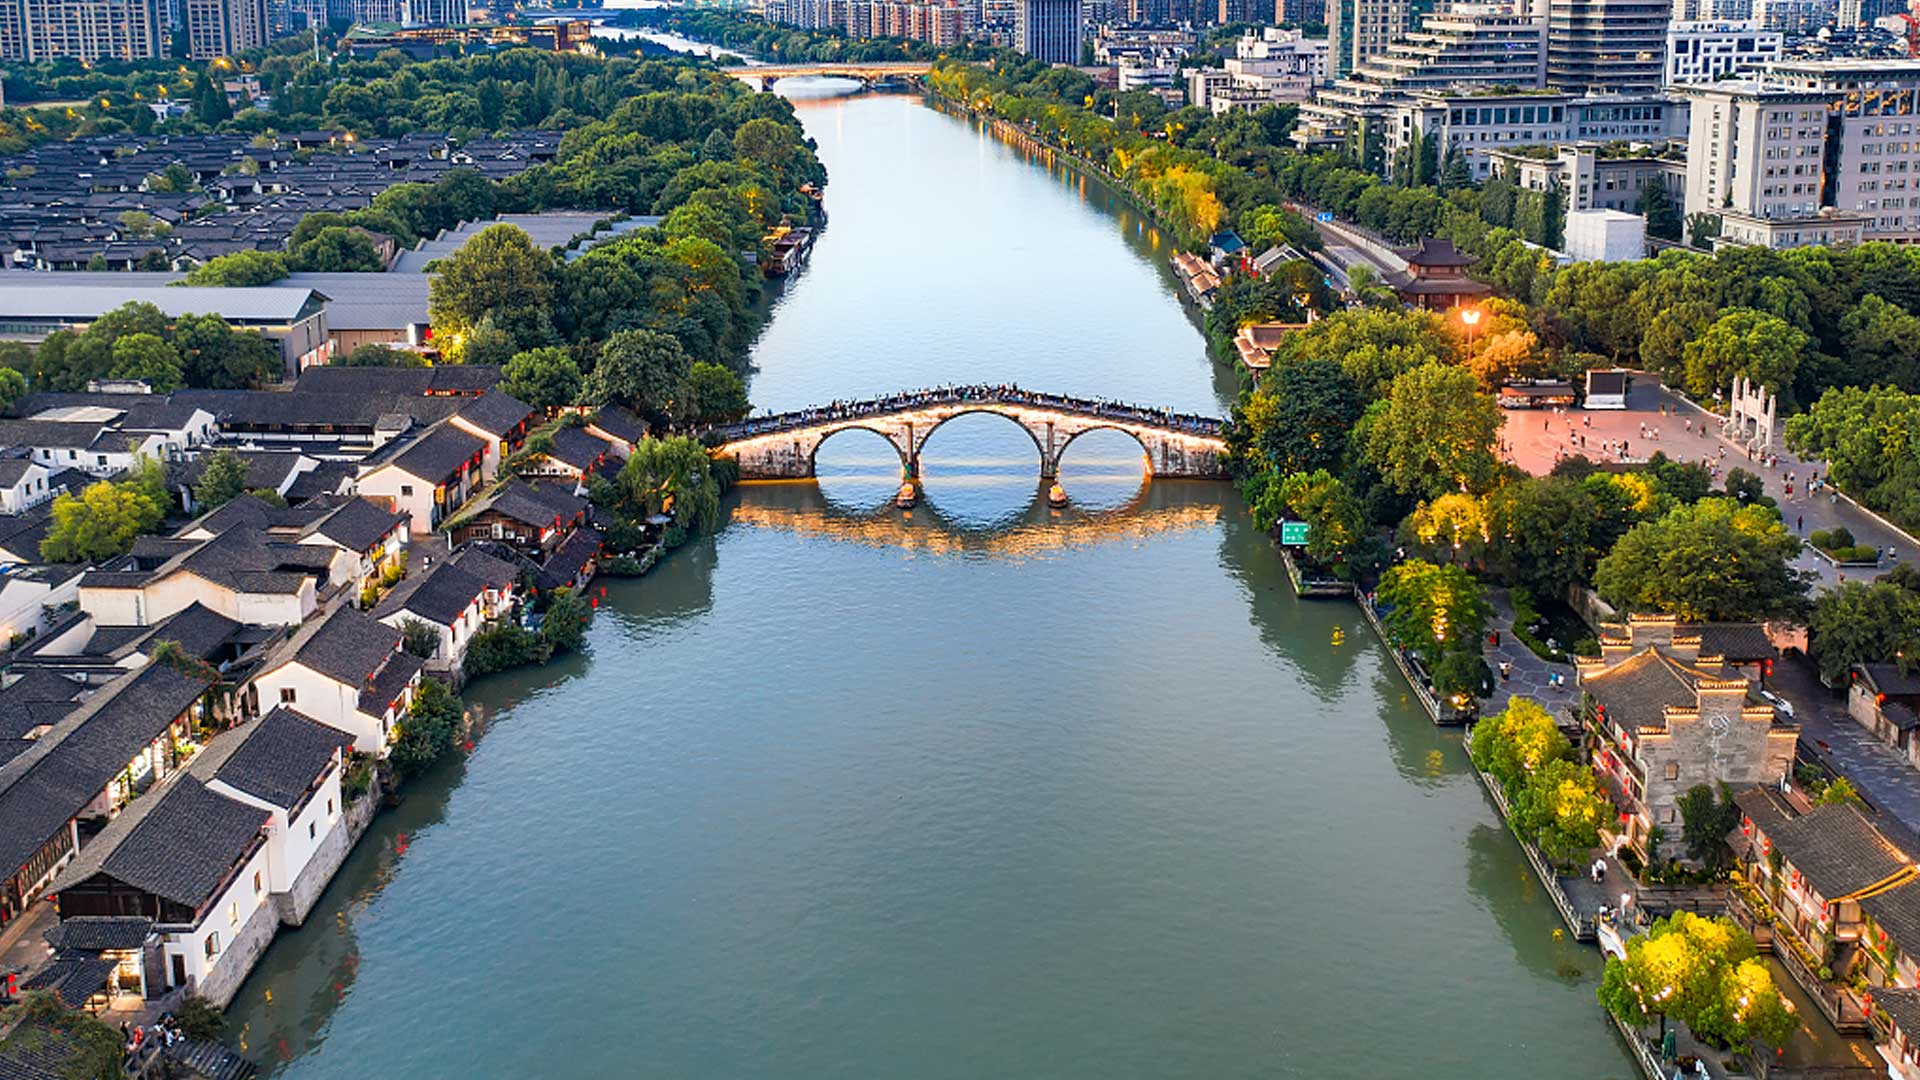 https://news.cgtn.com/news/2020-11-27/Live-A-night-view-of-the-Grand-Canal-in-Hangzhou-Ep-10-VKNloa5MGs/img/900f6d9078494fb18661d2cae0be5db4/900f6d9078494fb18661d2cae0be5db4.jpeg